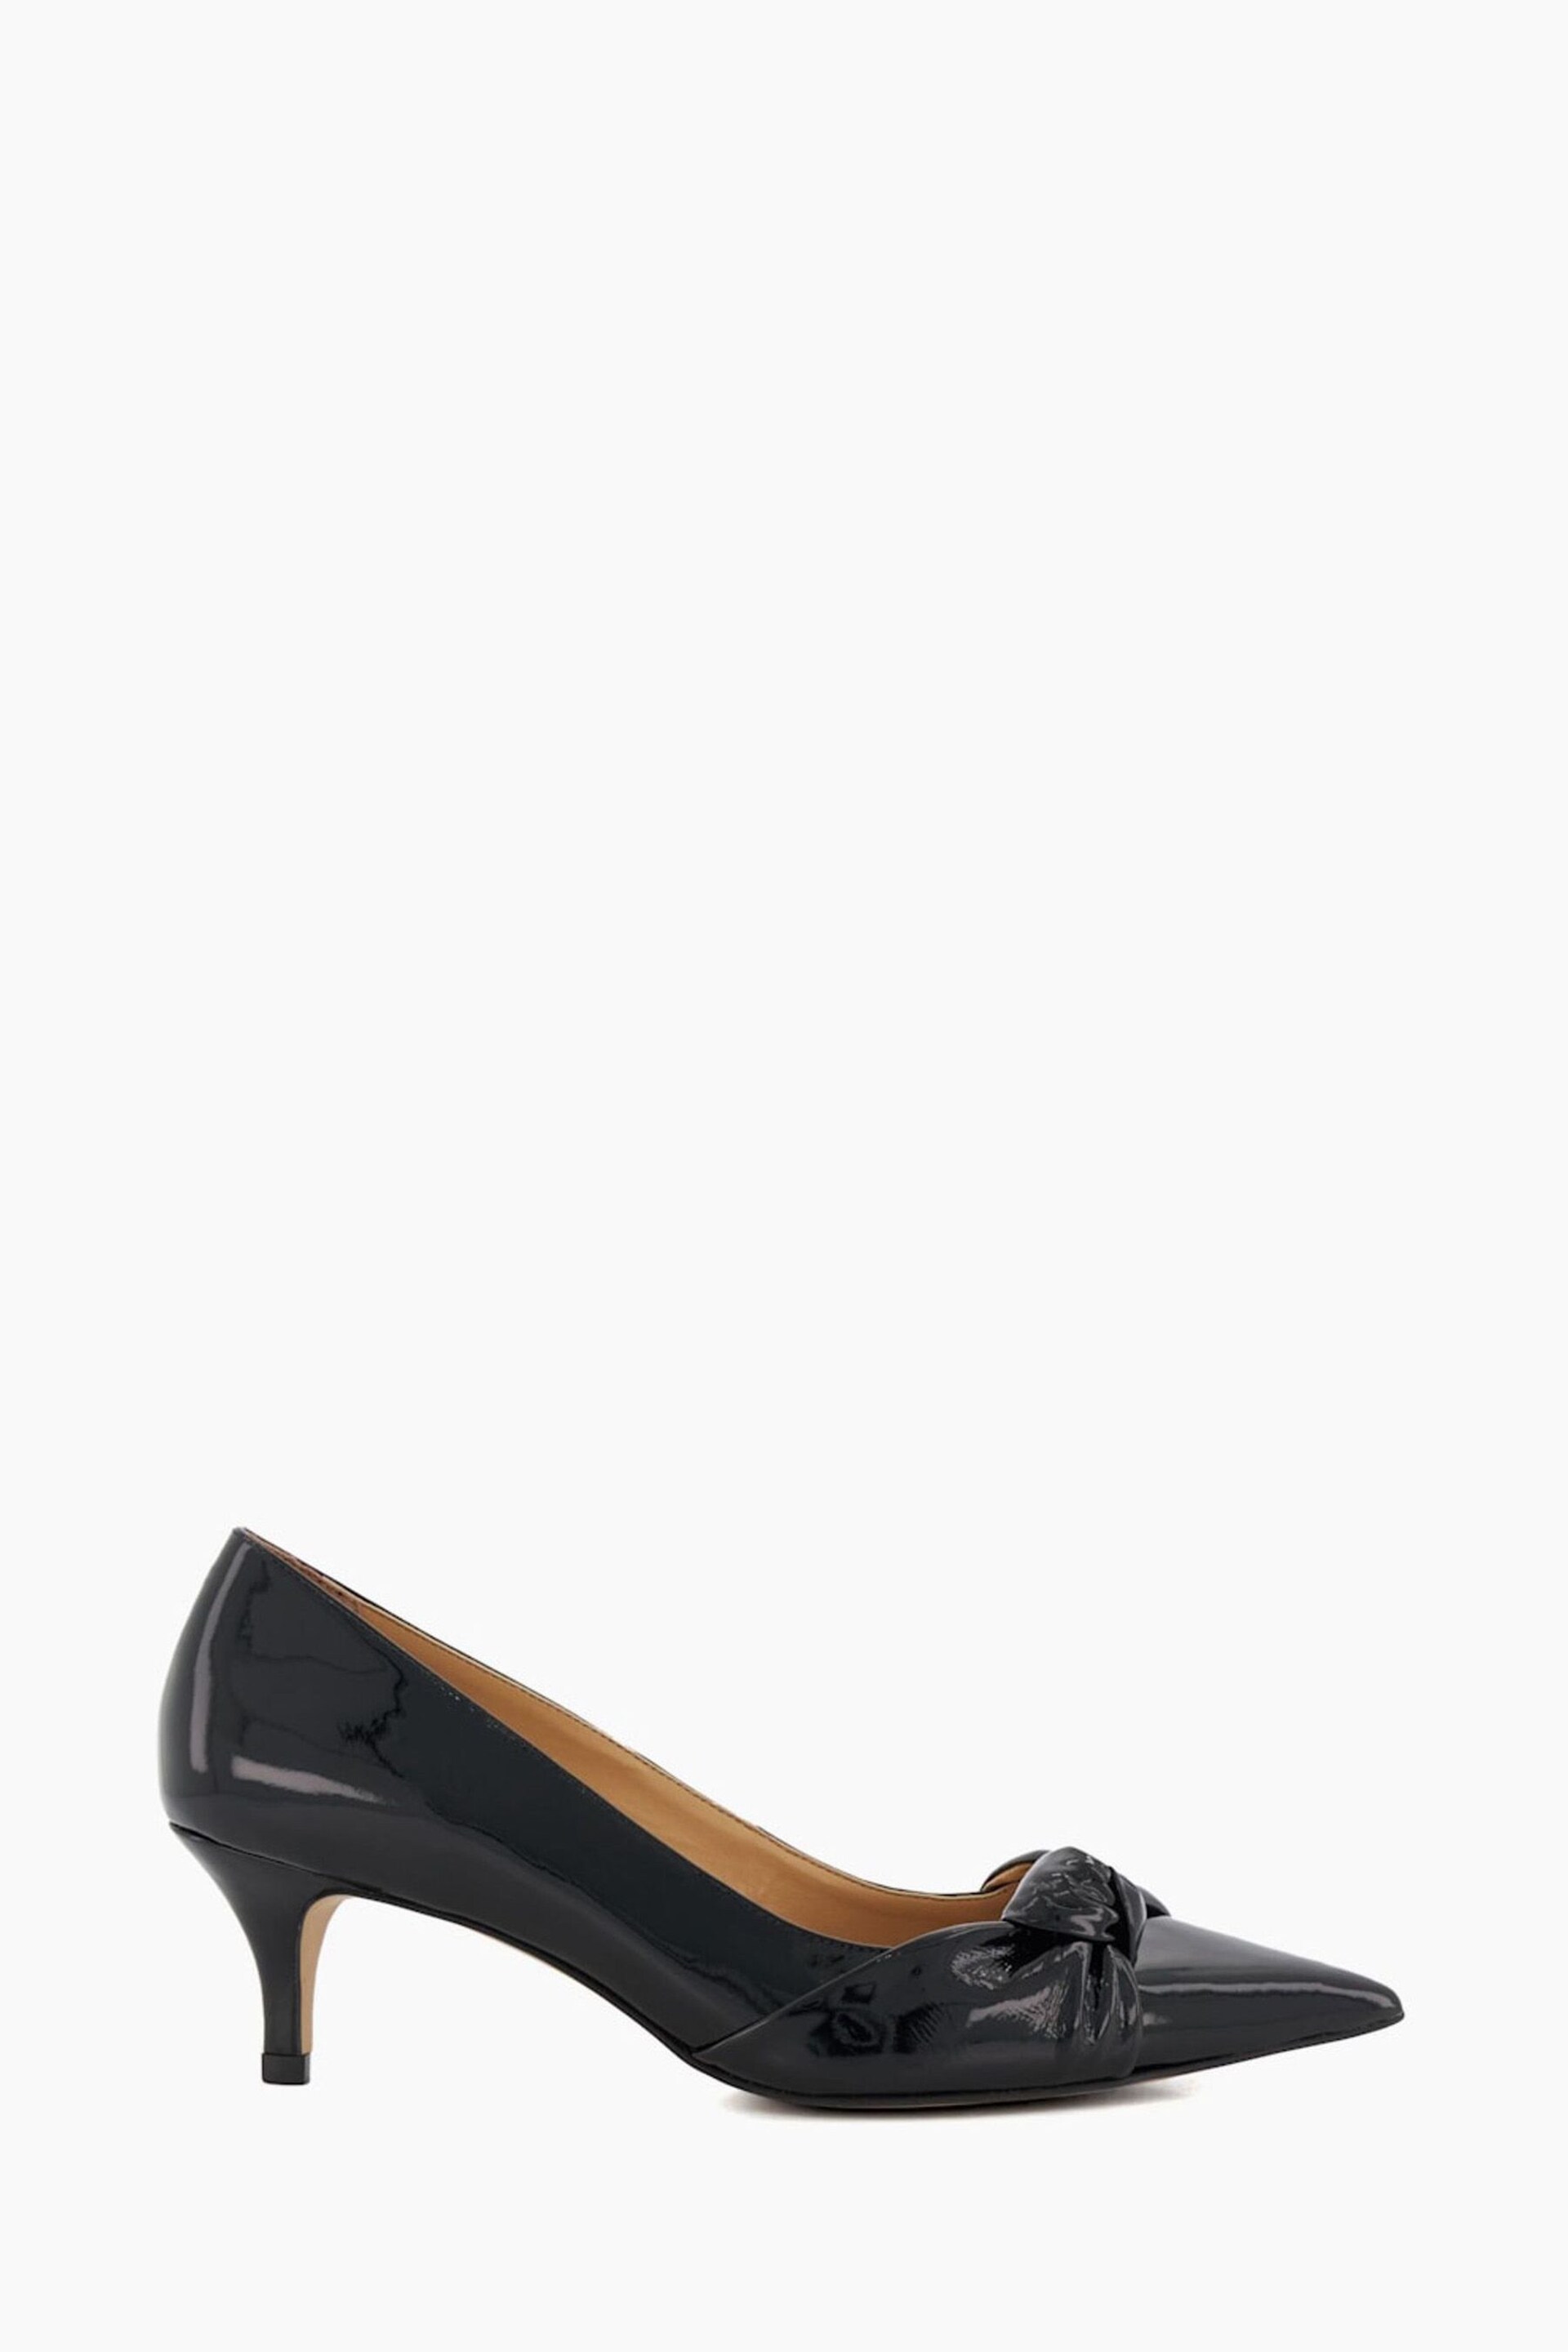 Dune London Black Address Soft Knot Pointed Court Shoes - Image 1 of 5